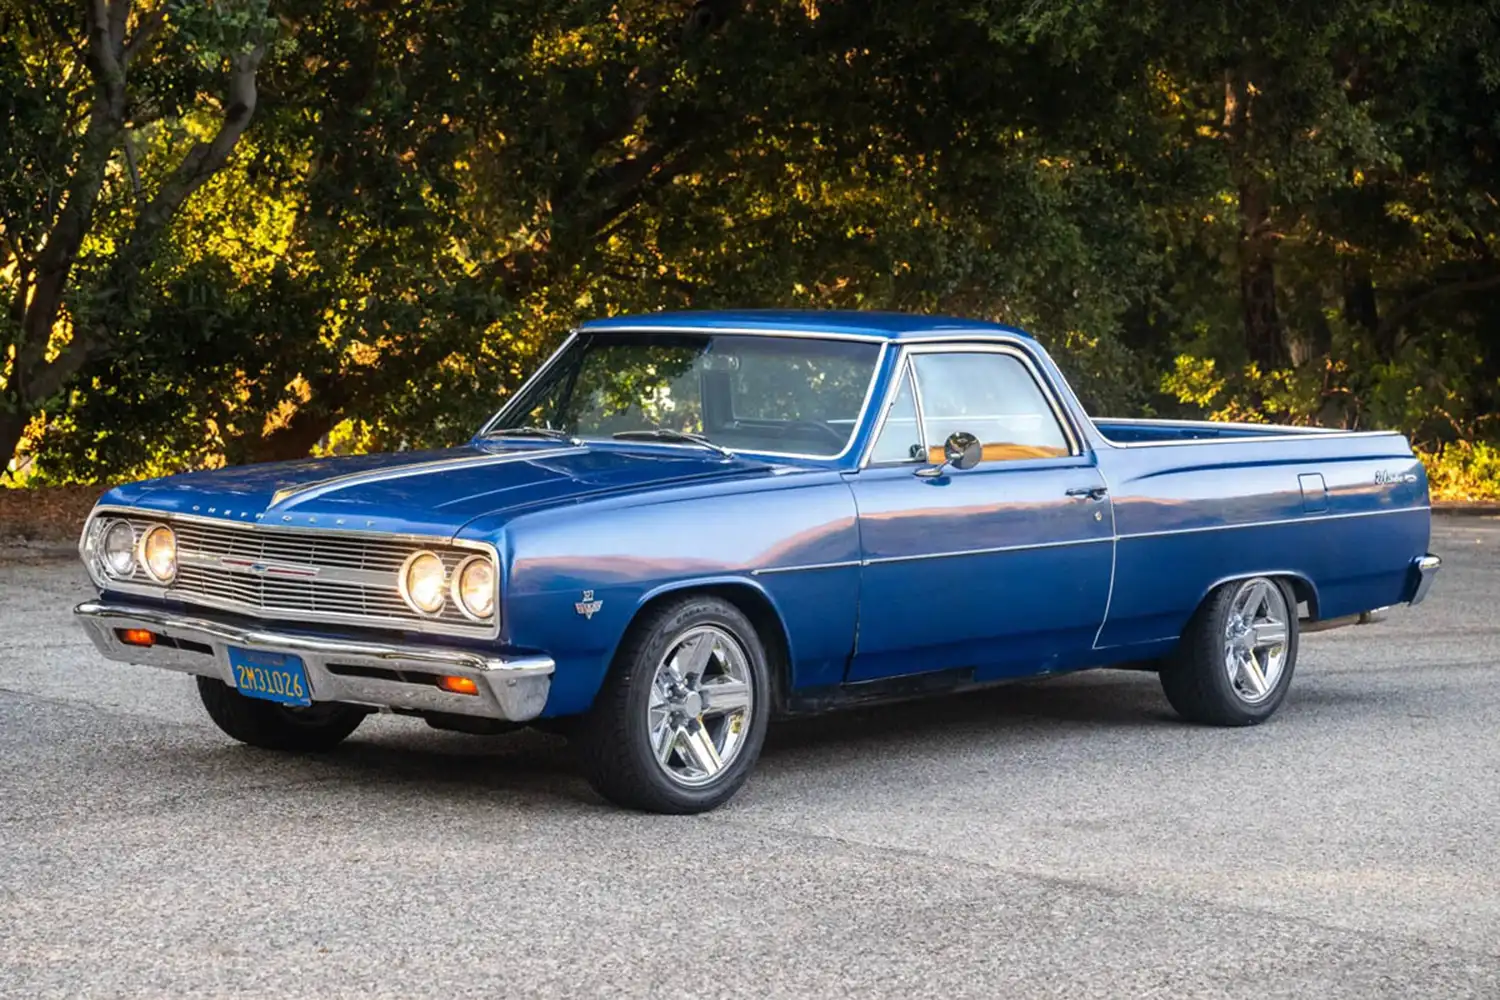 Classic Power: 1965 Chevrolet El Camino with 400ci V8 Up for Auction